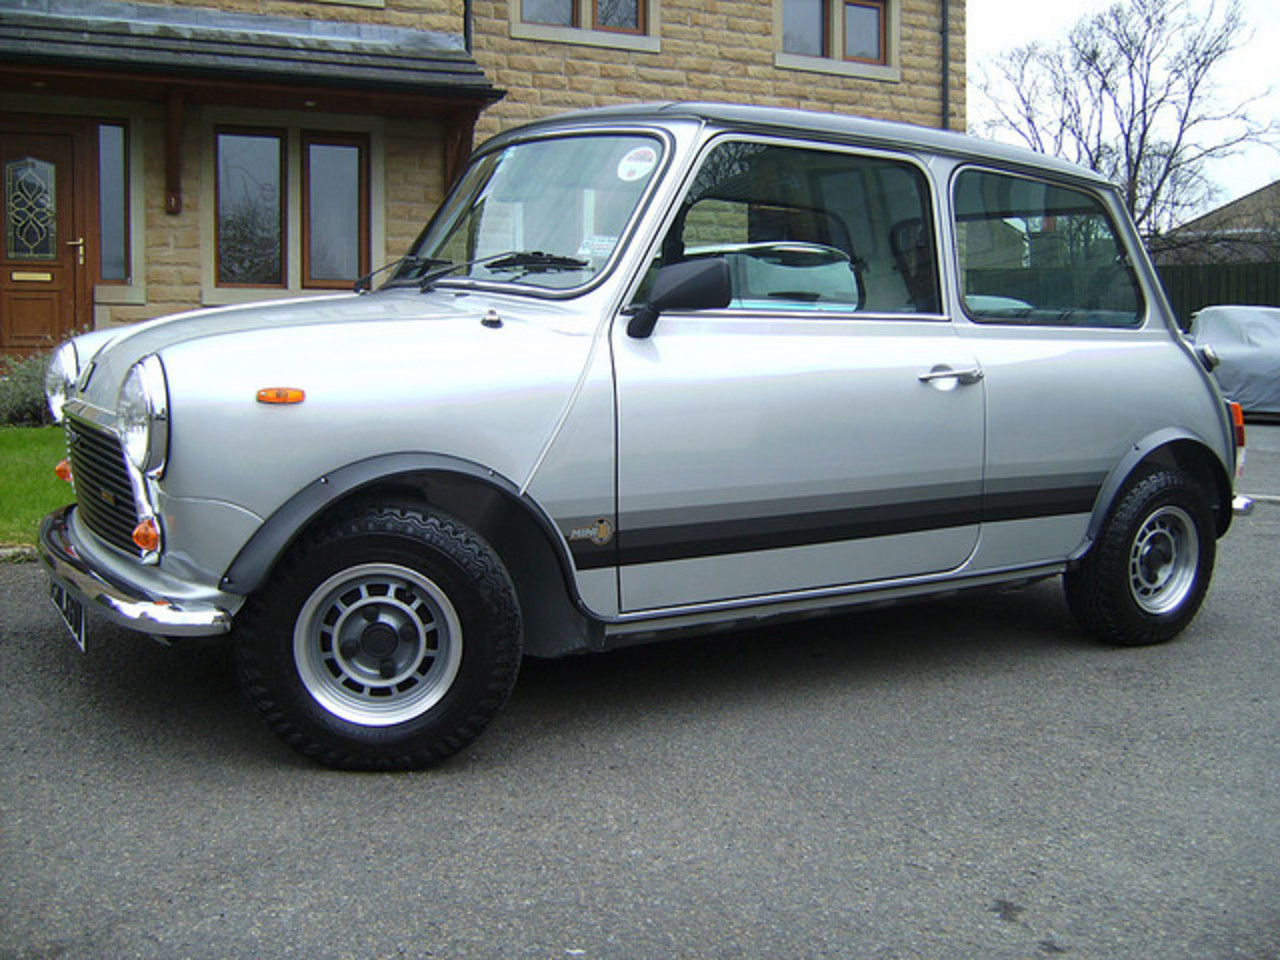 Silver Mini 1100 Special 1979 | Flickr - Photo Sharing!